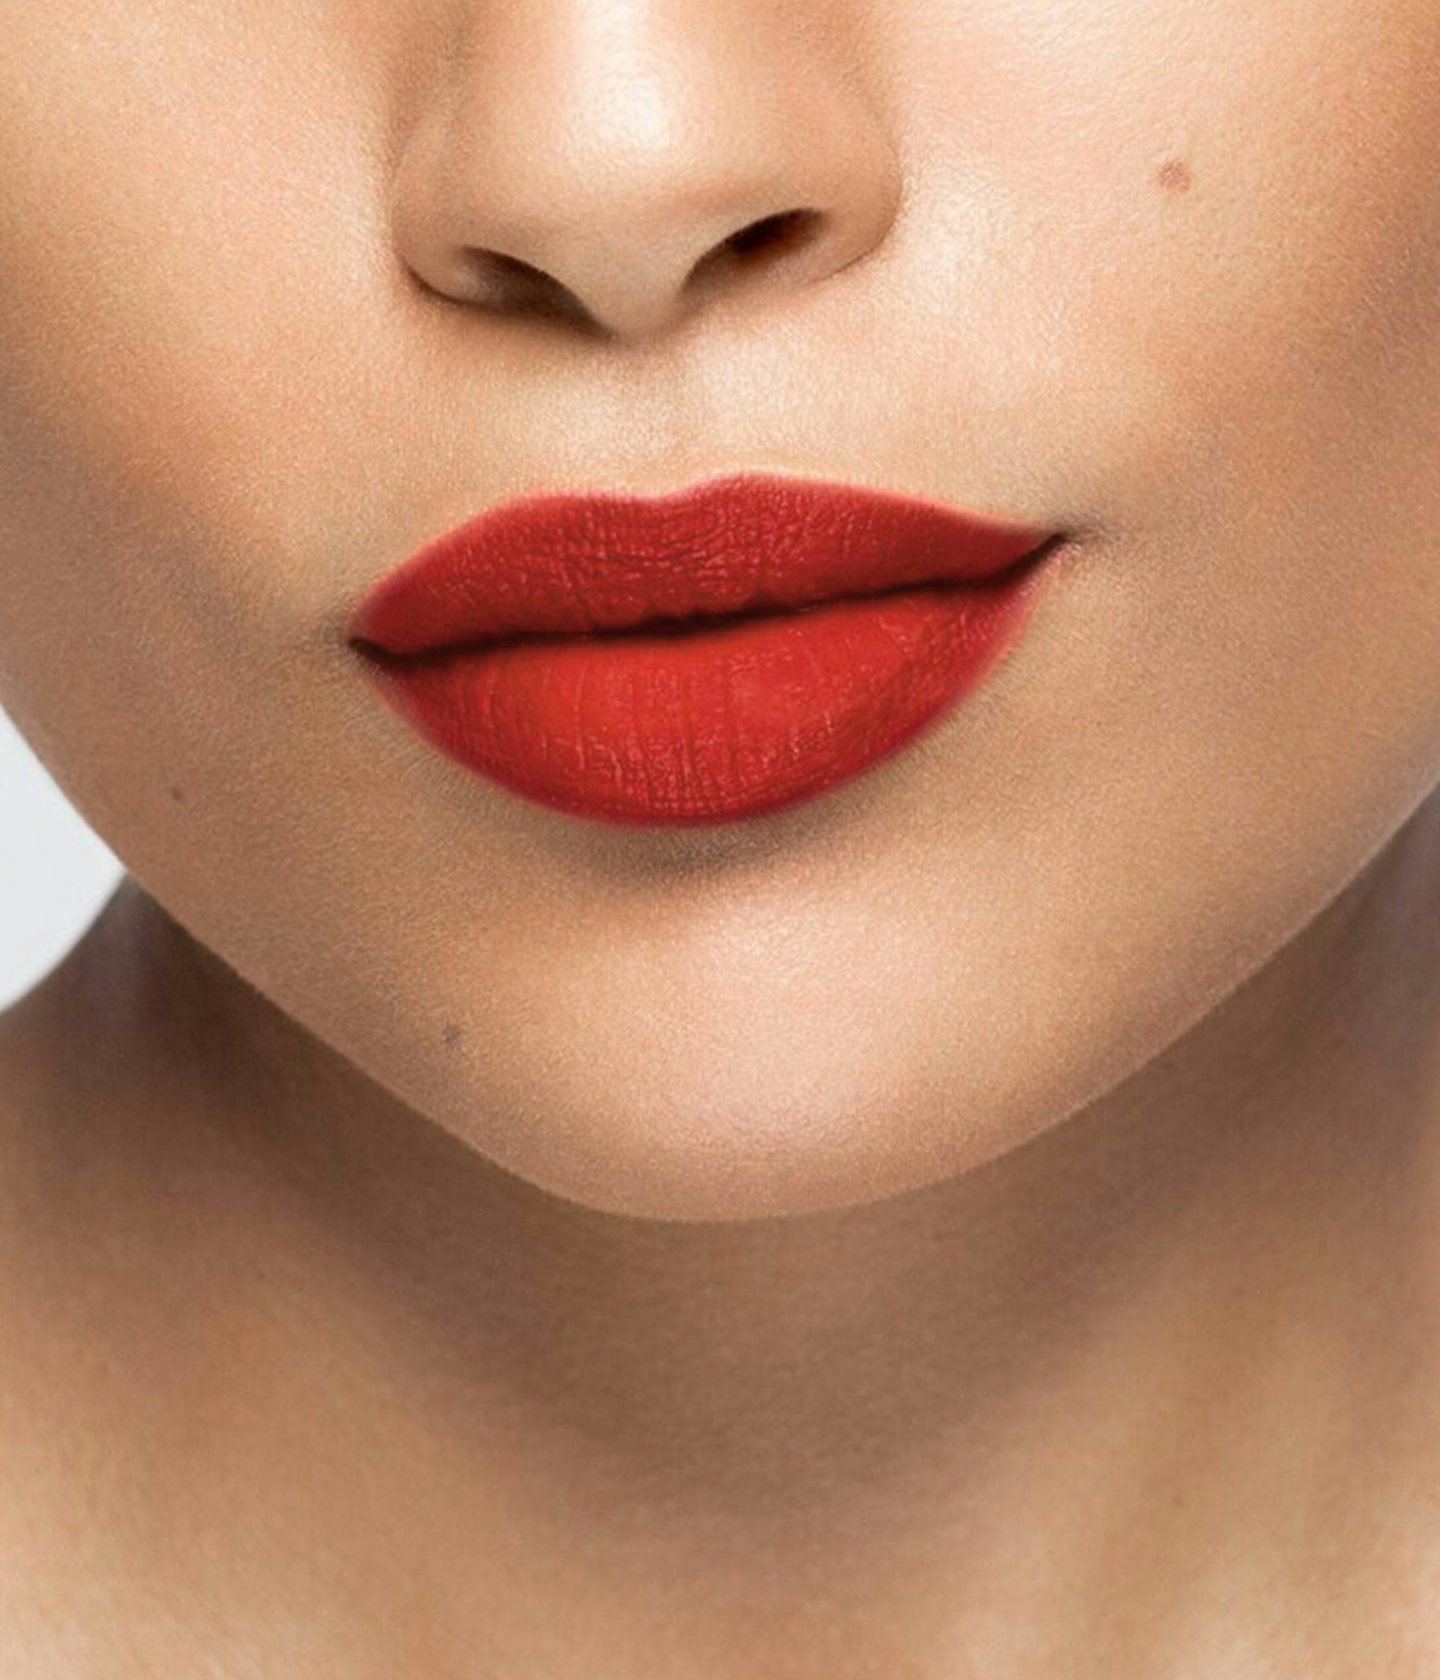 La bouche rouge The Red Andreea lipstick shade on the lips of a medium skin model